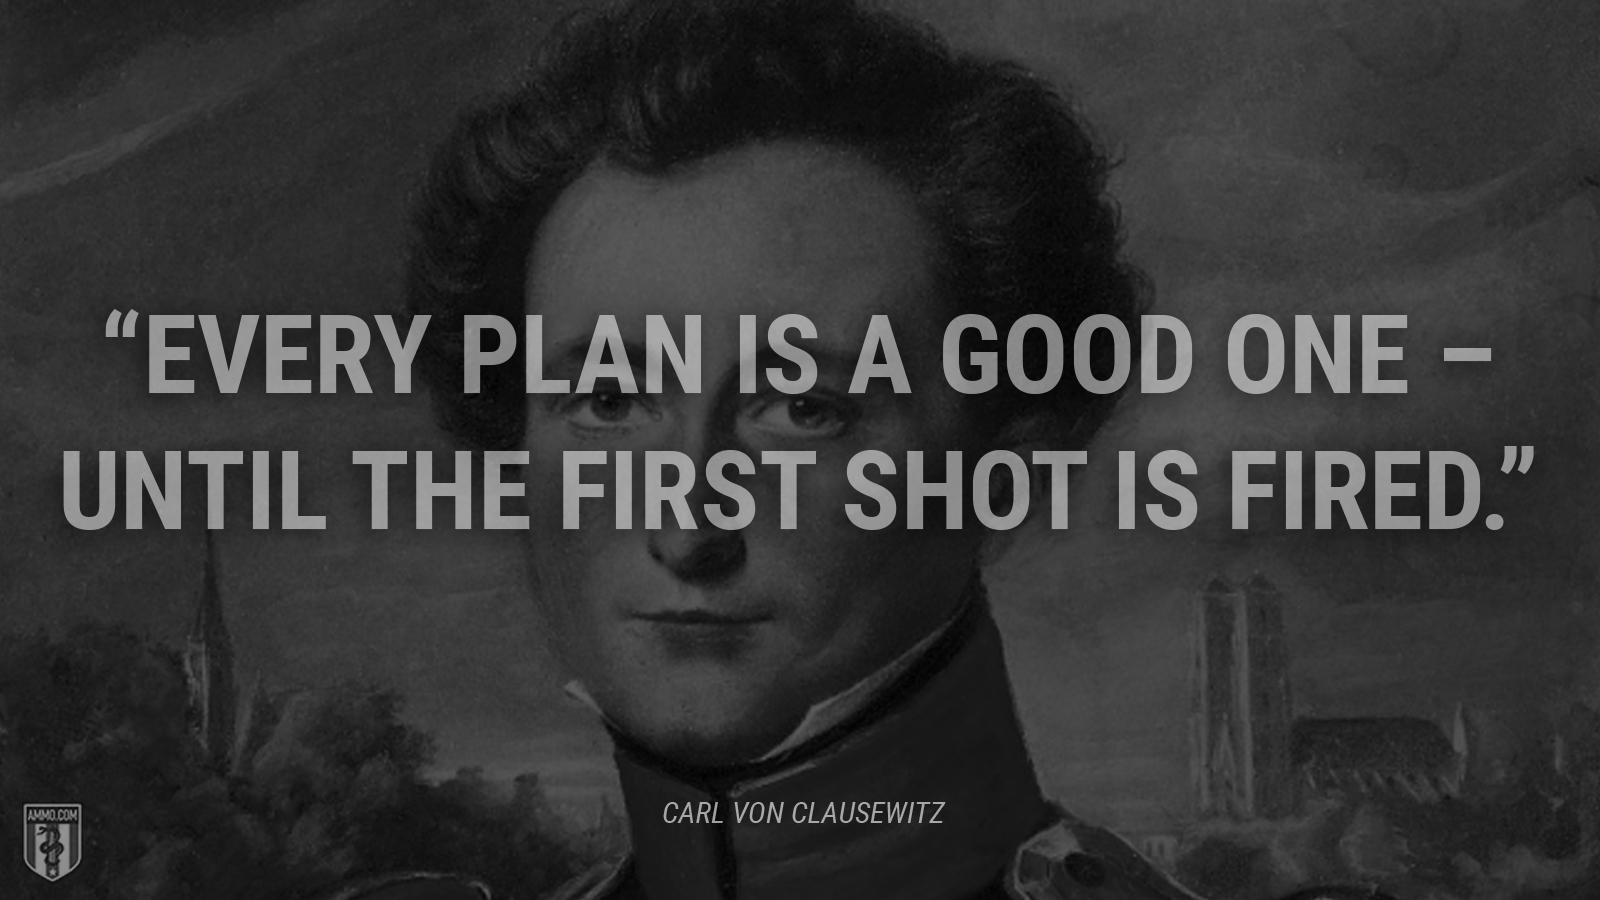 “Every plan is a good one - until the first shot is fired.” - Carl von Clausewitz